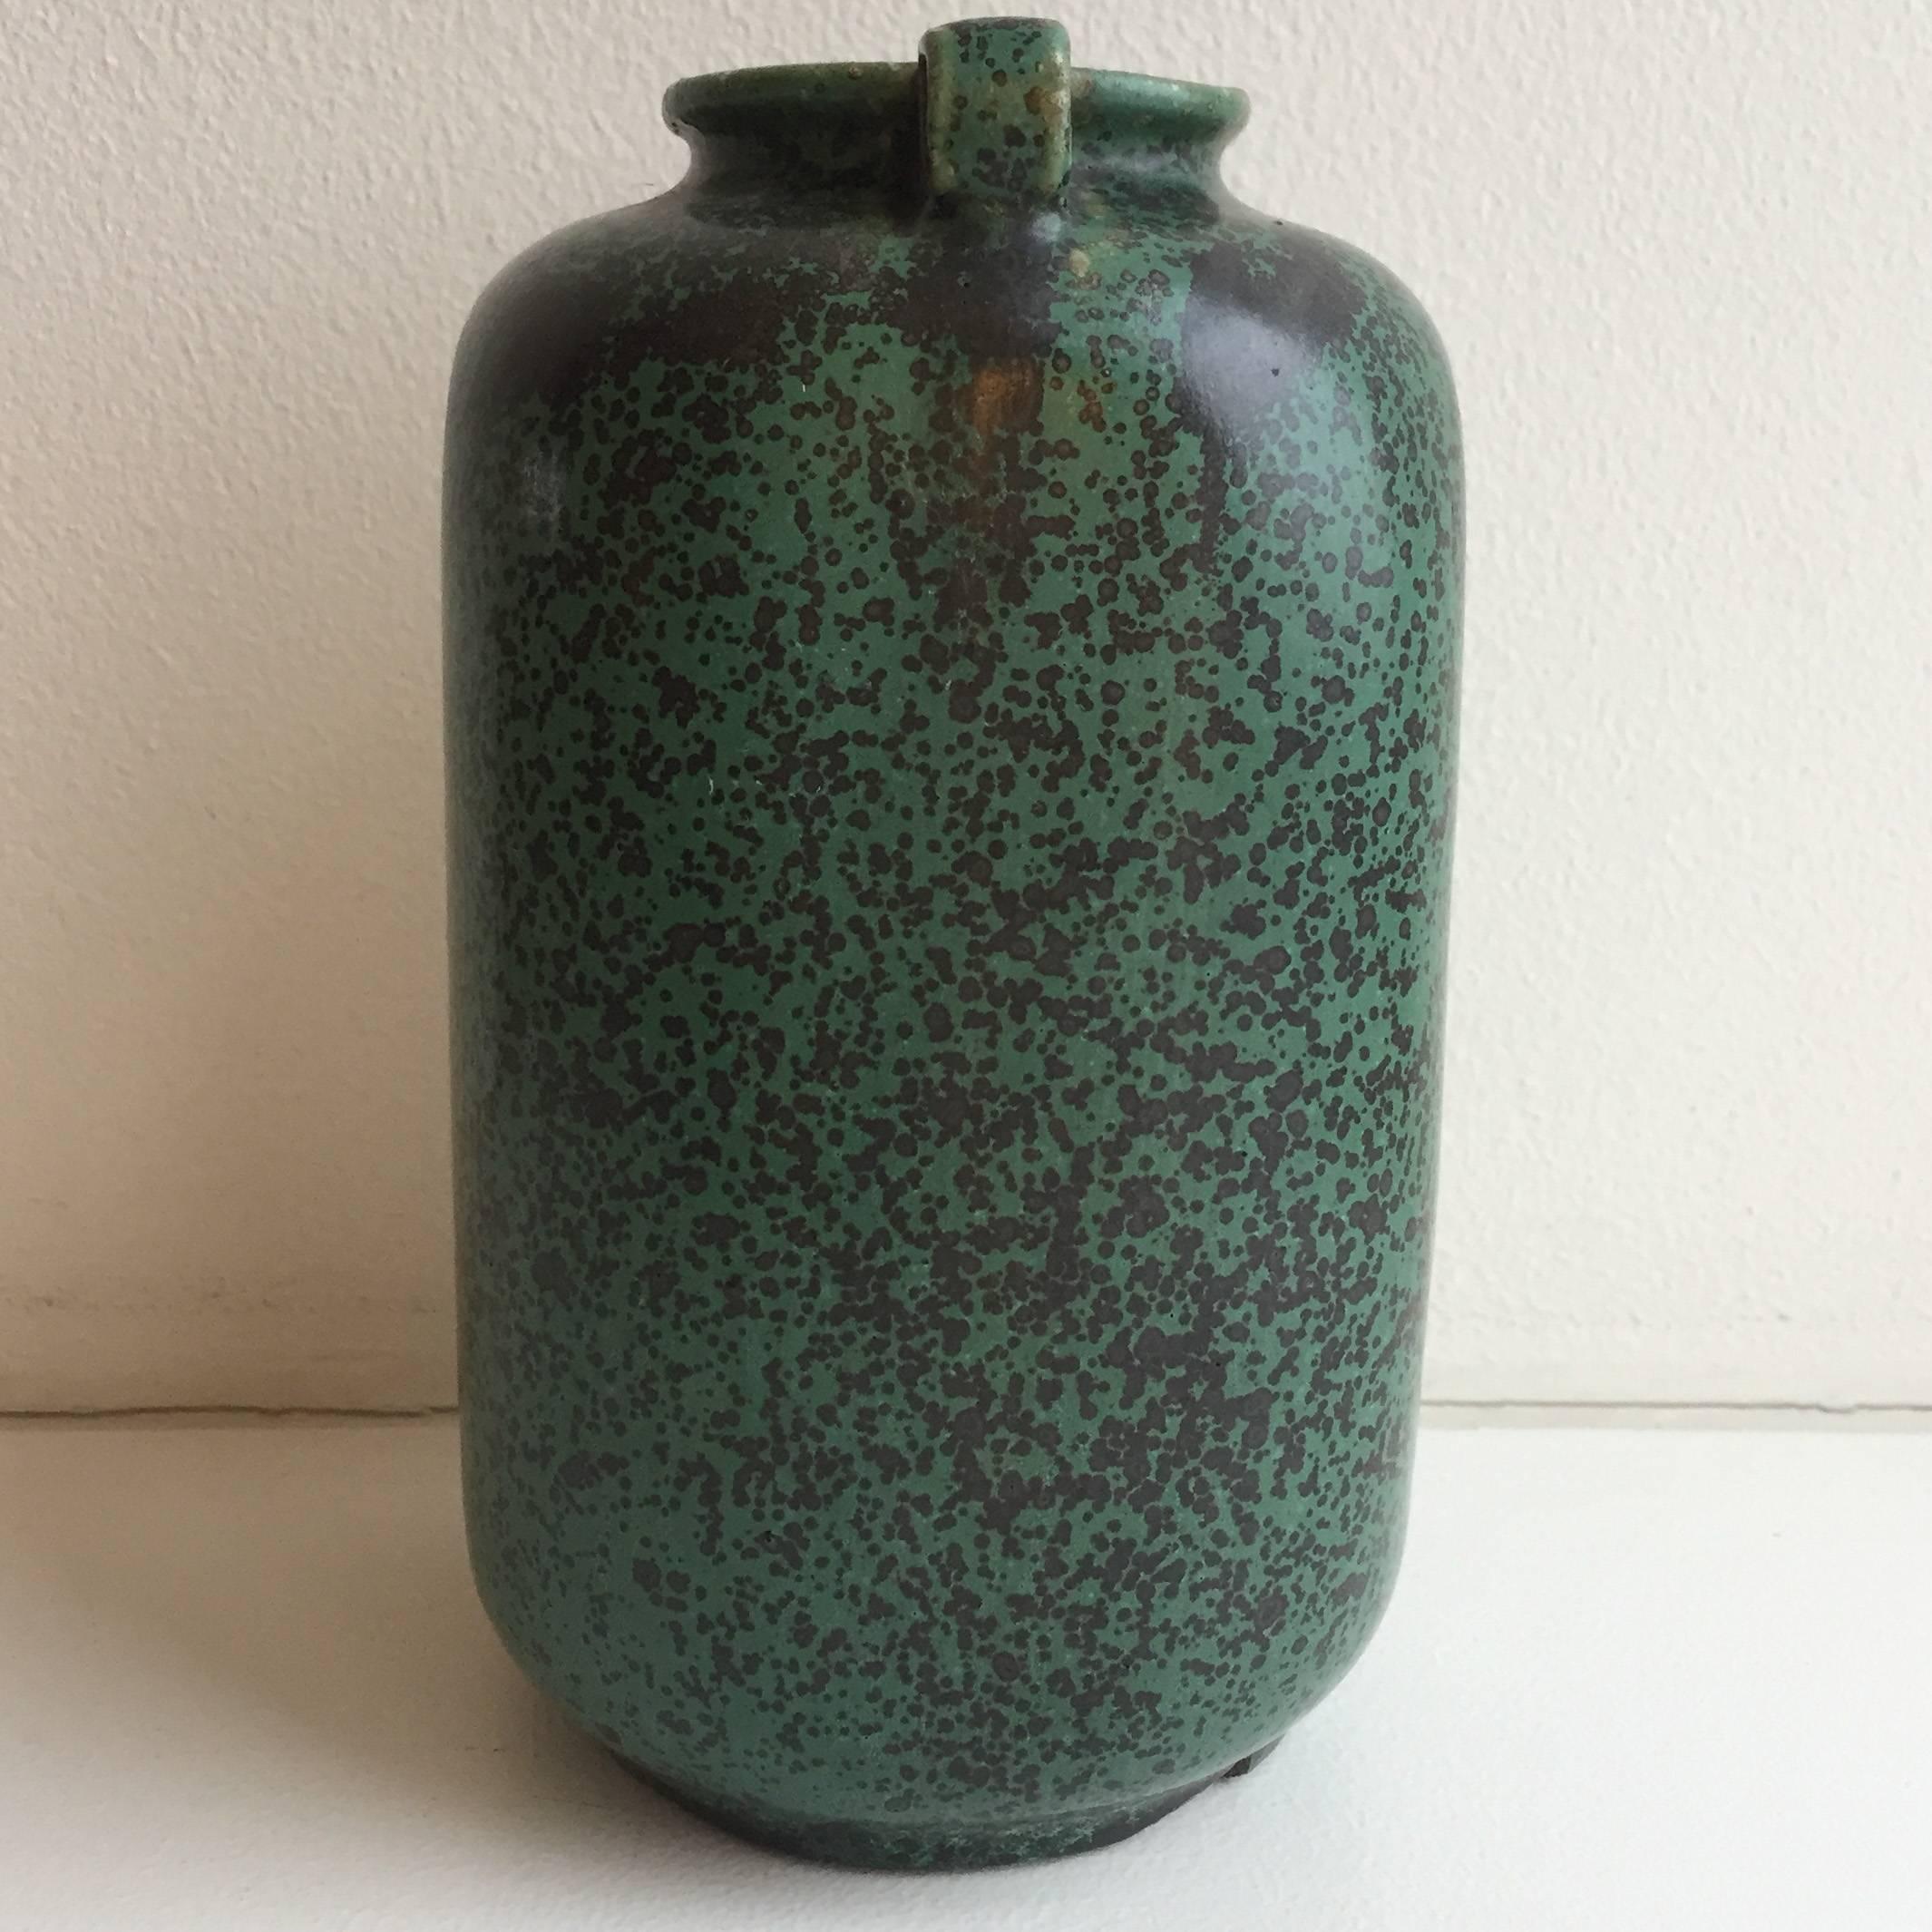 Arne Bang green glazed stoneware vase 1950s model 121 signed with his initials.
Have a defect in the bottom from the burning this is reflected in the price. See photos.
Otherwise in very good condition.